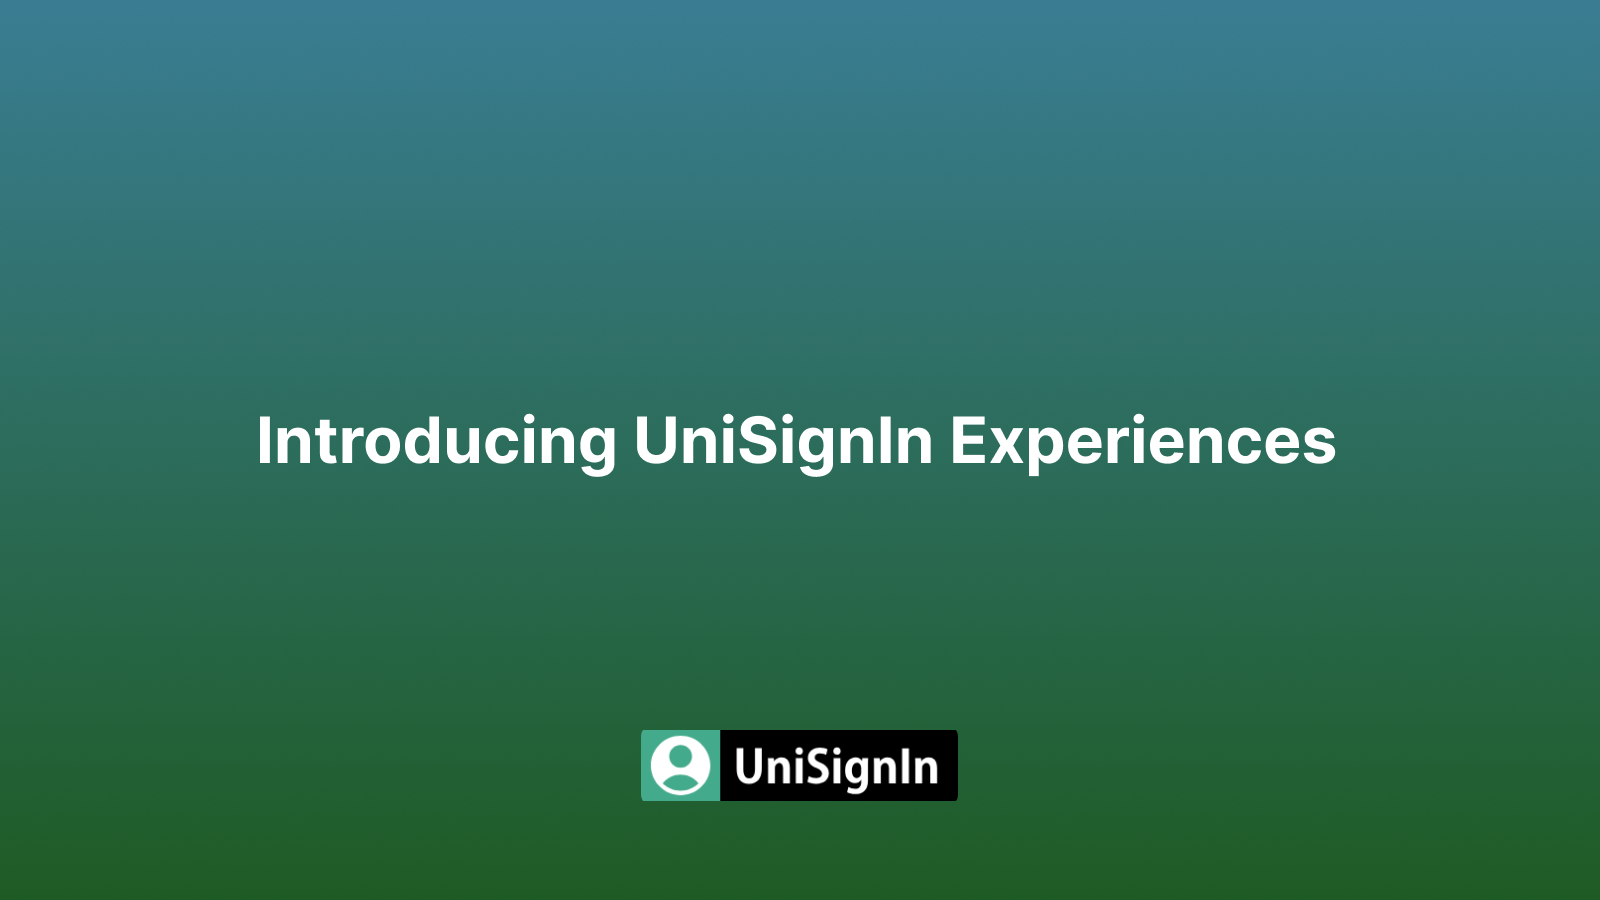 Introducing UniSignIn Experiences for First-Party Data Activation